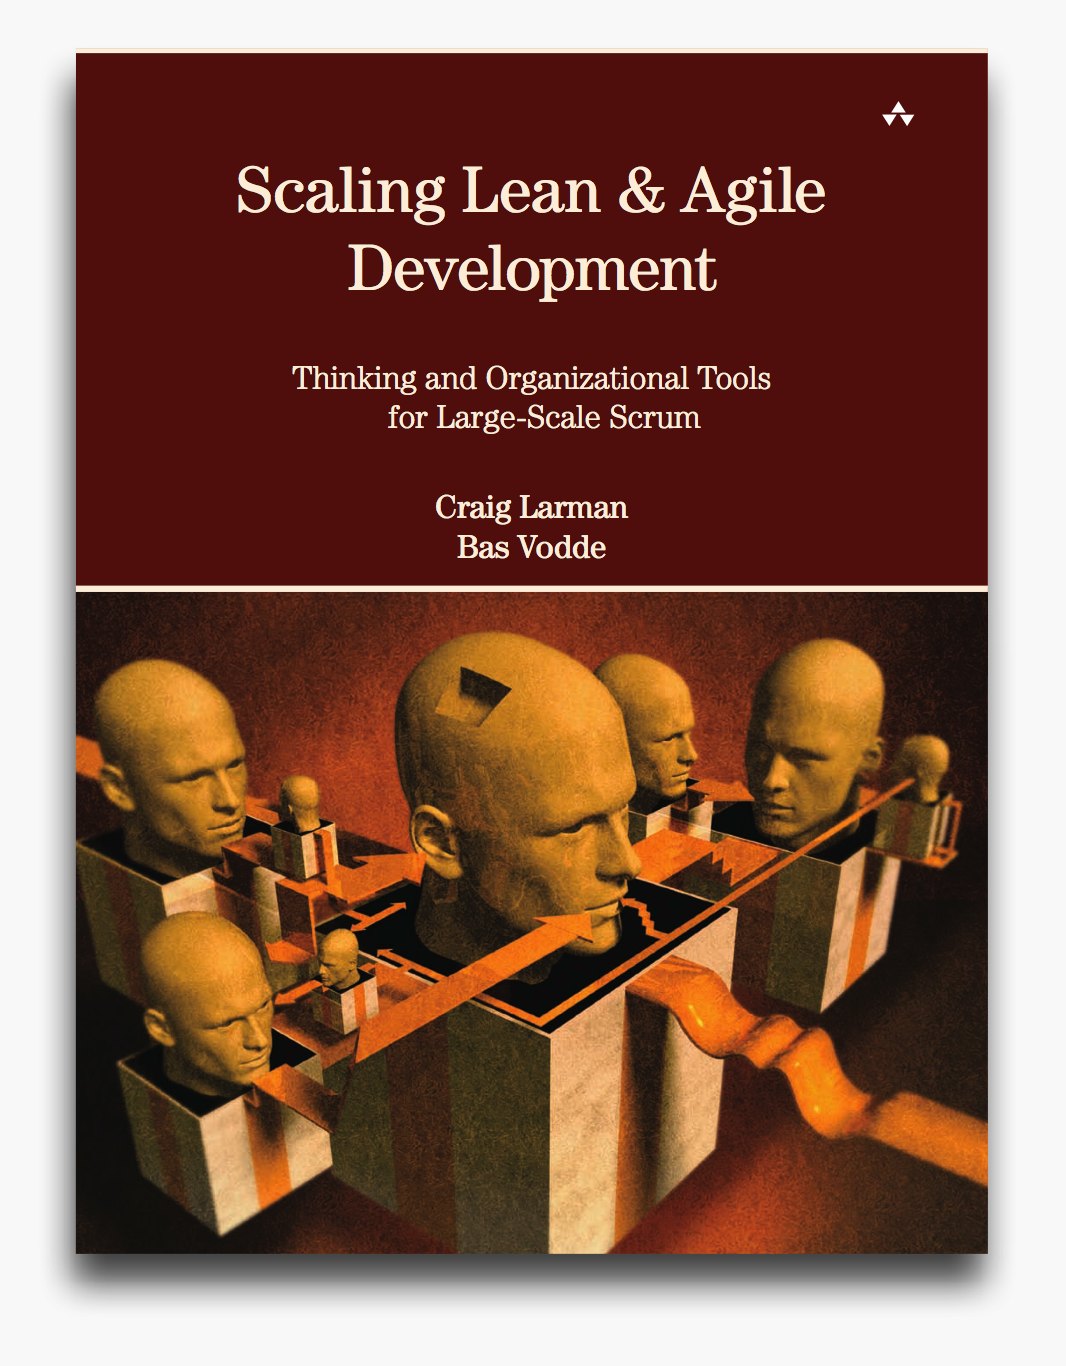 Scaling Lean and Agile Development